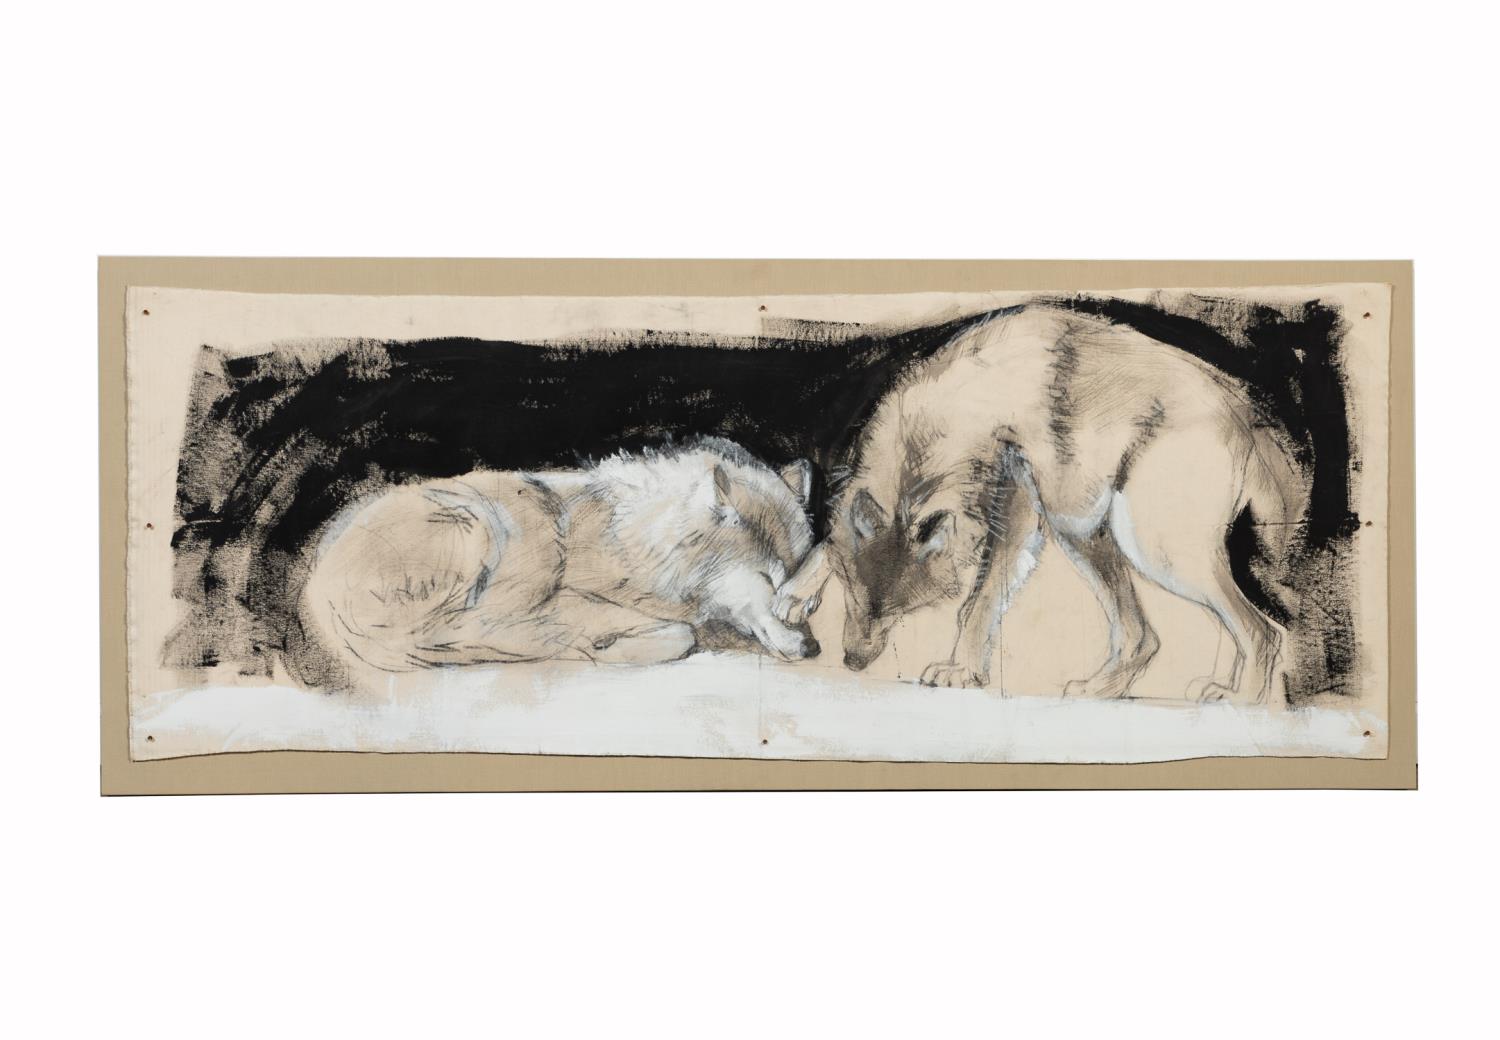 HELEN DURANT, "AFFECTION" TWO WOLVES